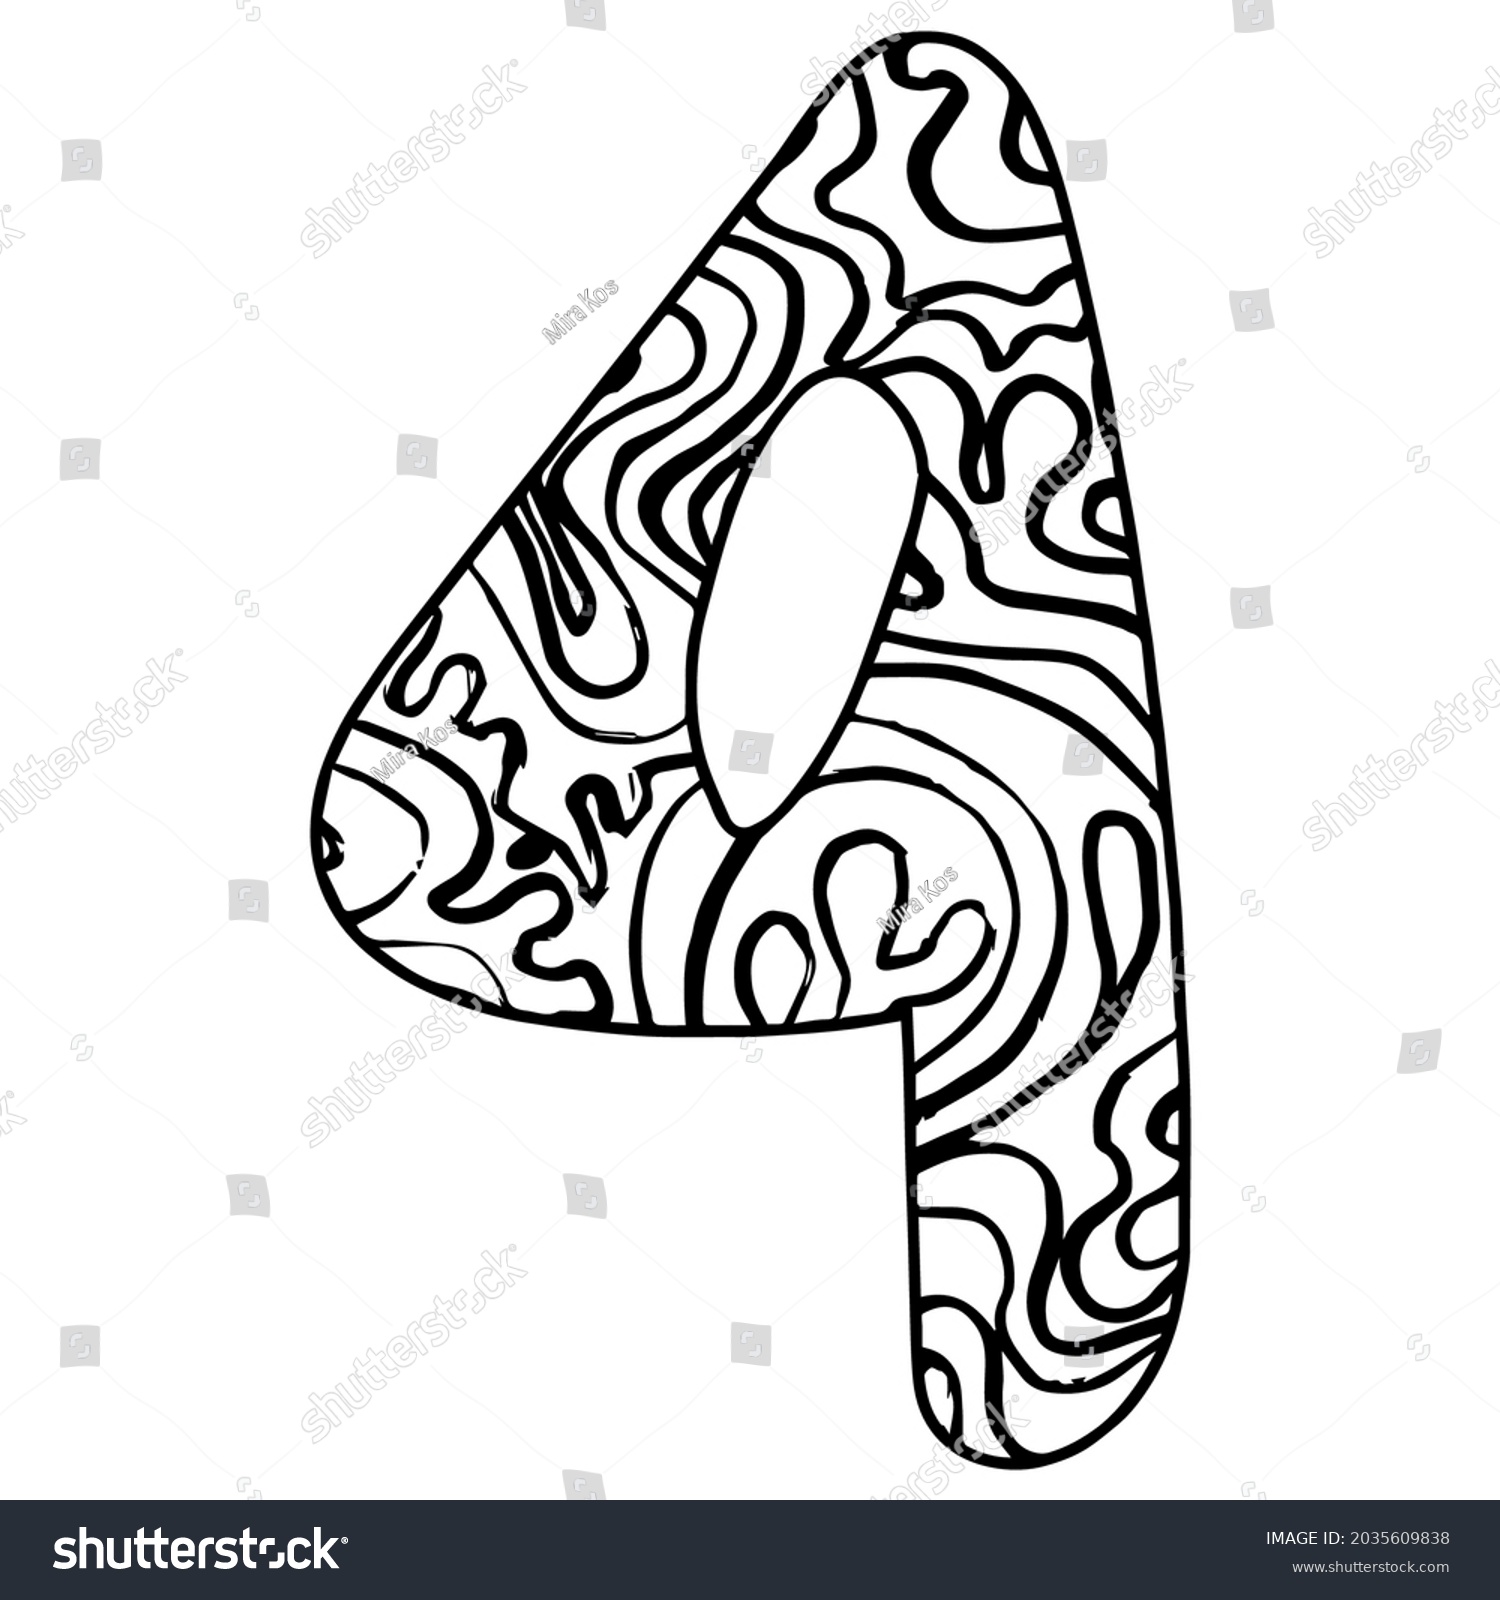 SVG of Zentangle stylized alphabet - number 4. Black white hand drawn doodle. Ethnic pattern. African, indian, totem, design, adult antistress coloring page. Simple flat vector illustration svg